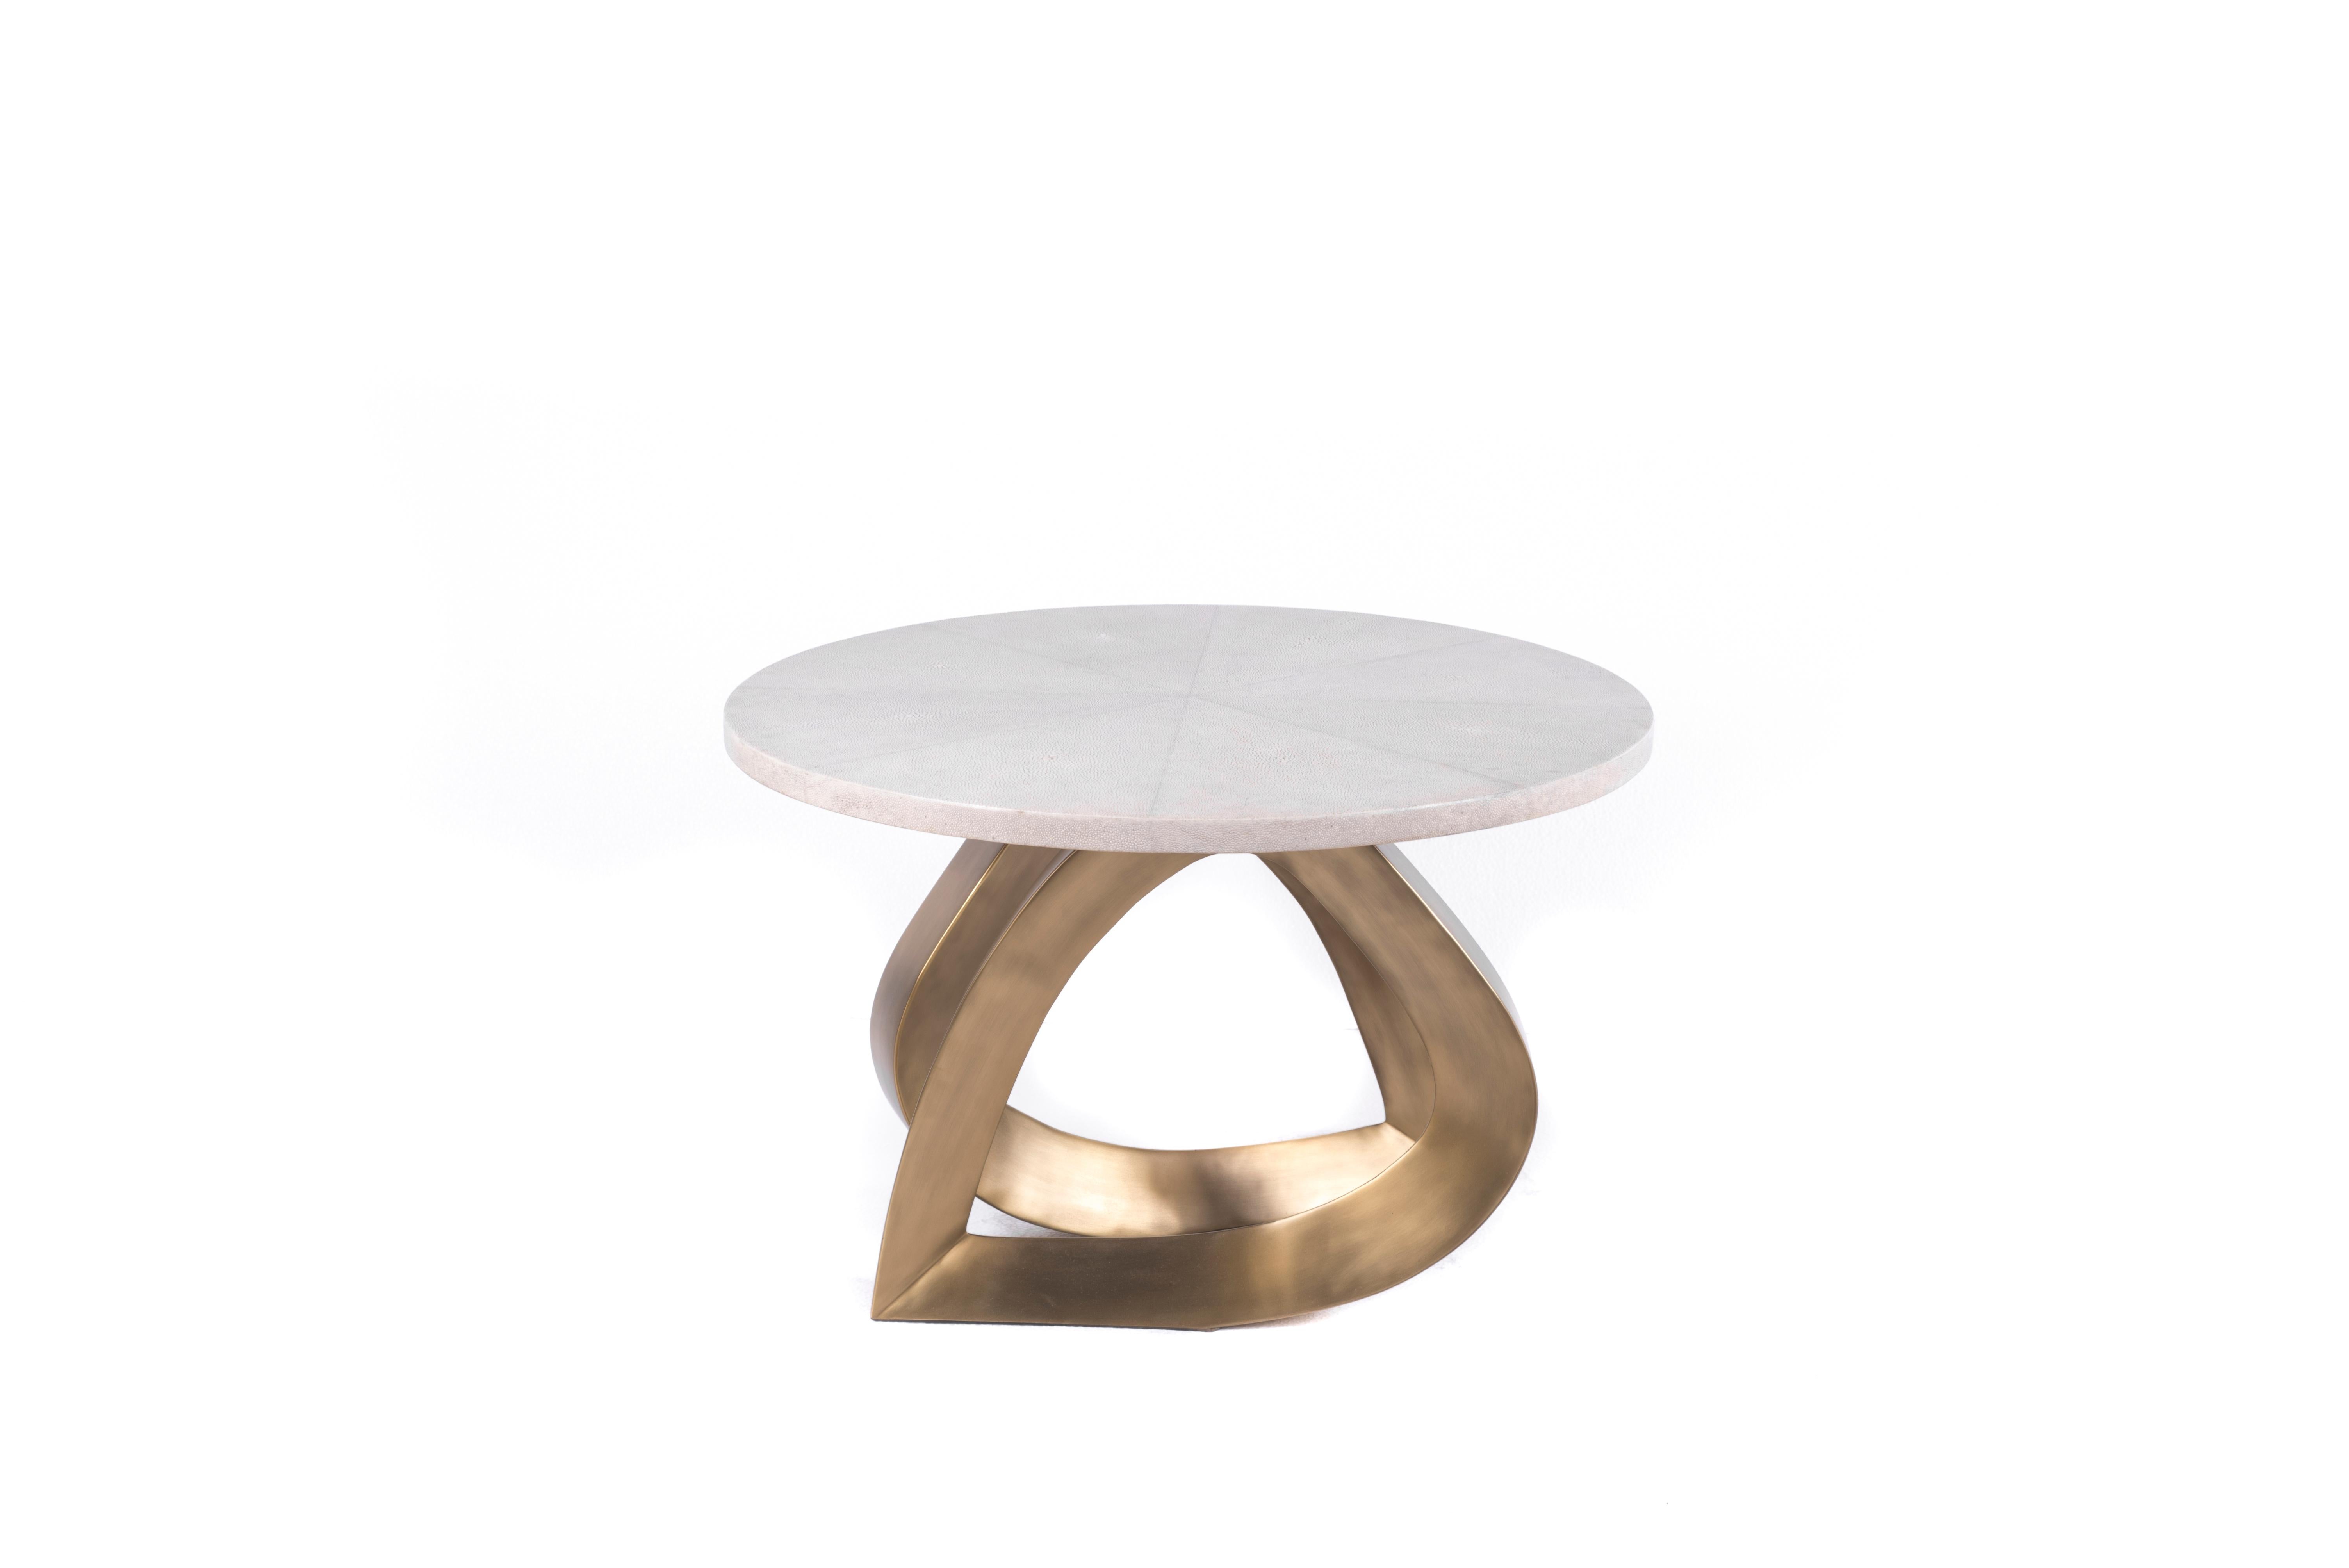 Hand-Crafted Set of 2 Teardrop Nesting Coffee Tables, Cream Shagreen and Brass by Kifu Paris